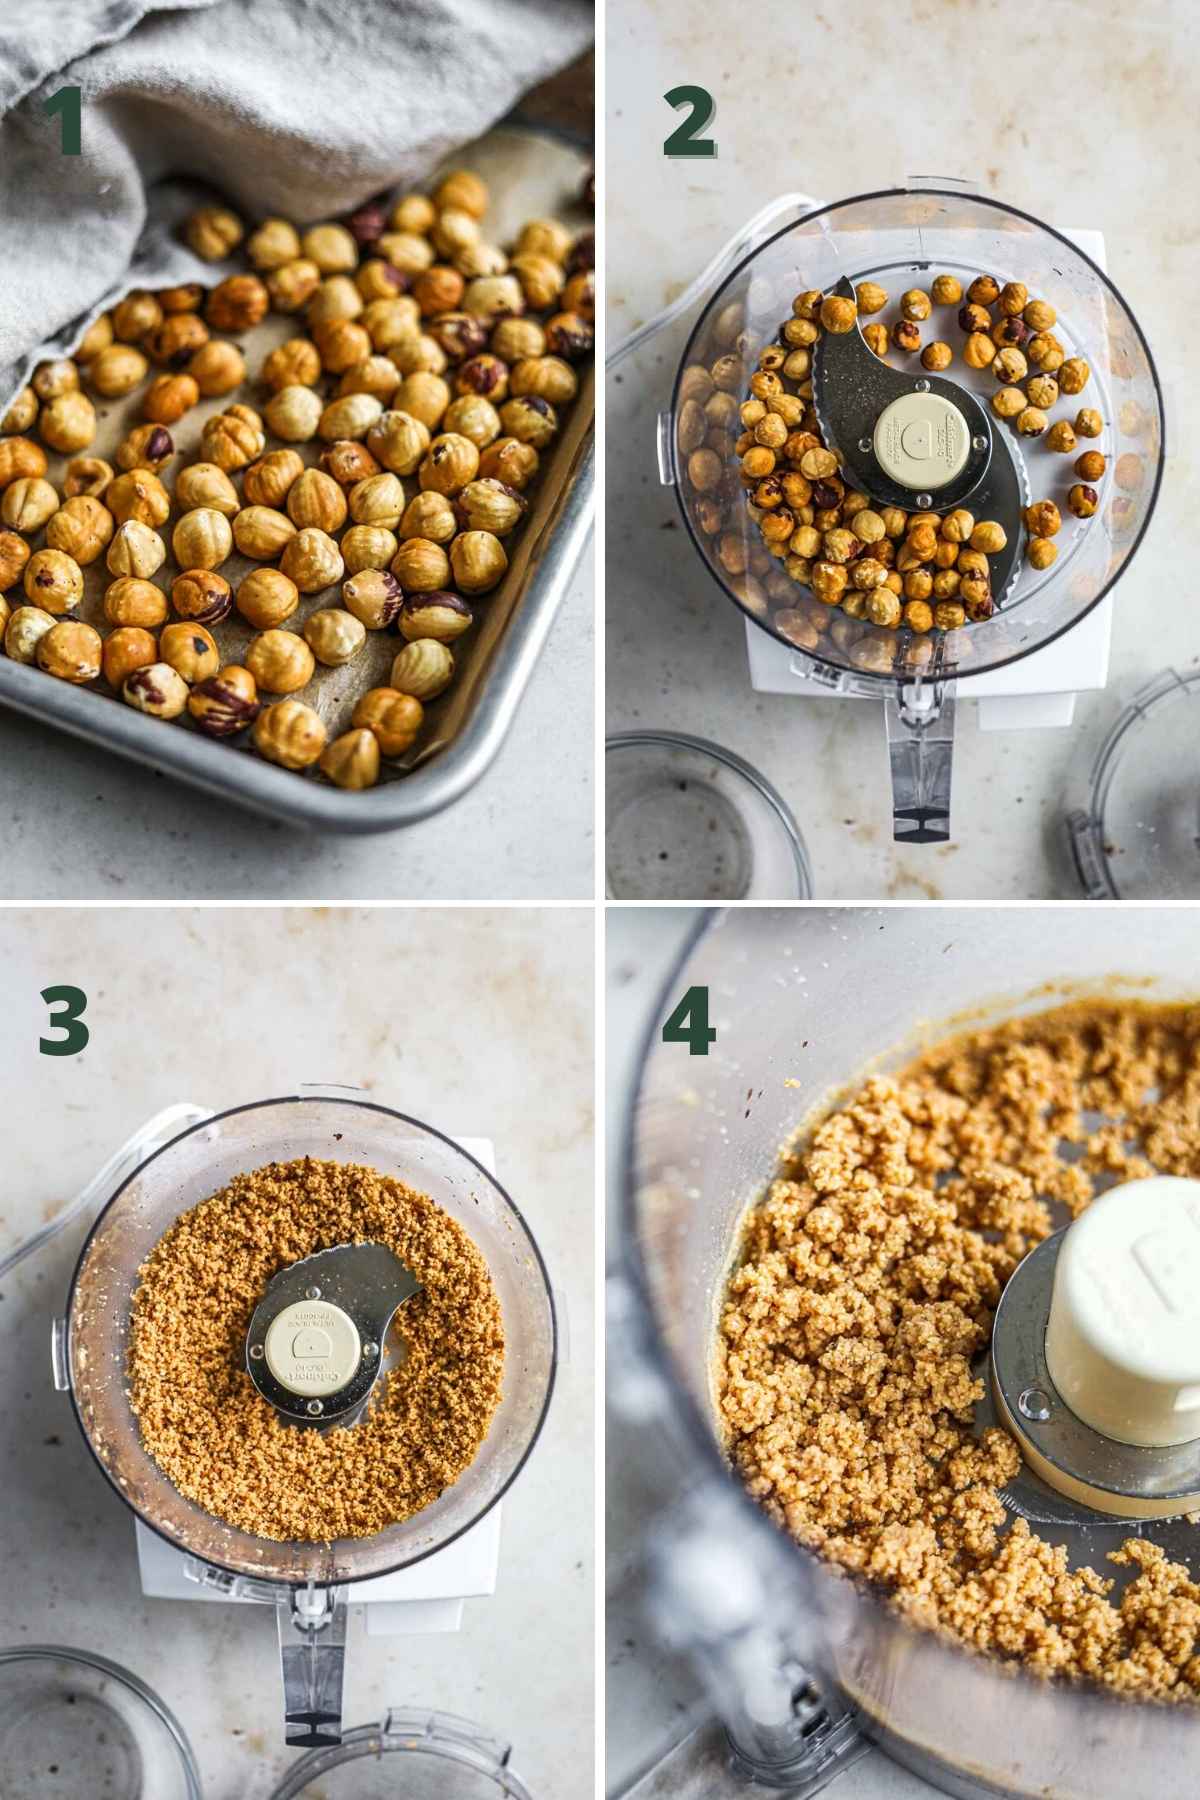 Steps to make hazelnut flour/meal, including toasting the hazelnuts, placing the nuts in the food processor, pulsing until it forms a meal, then using for baking.